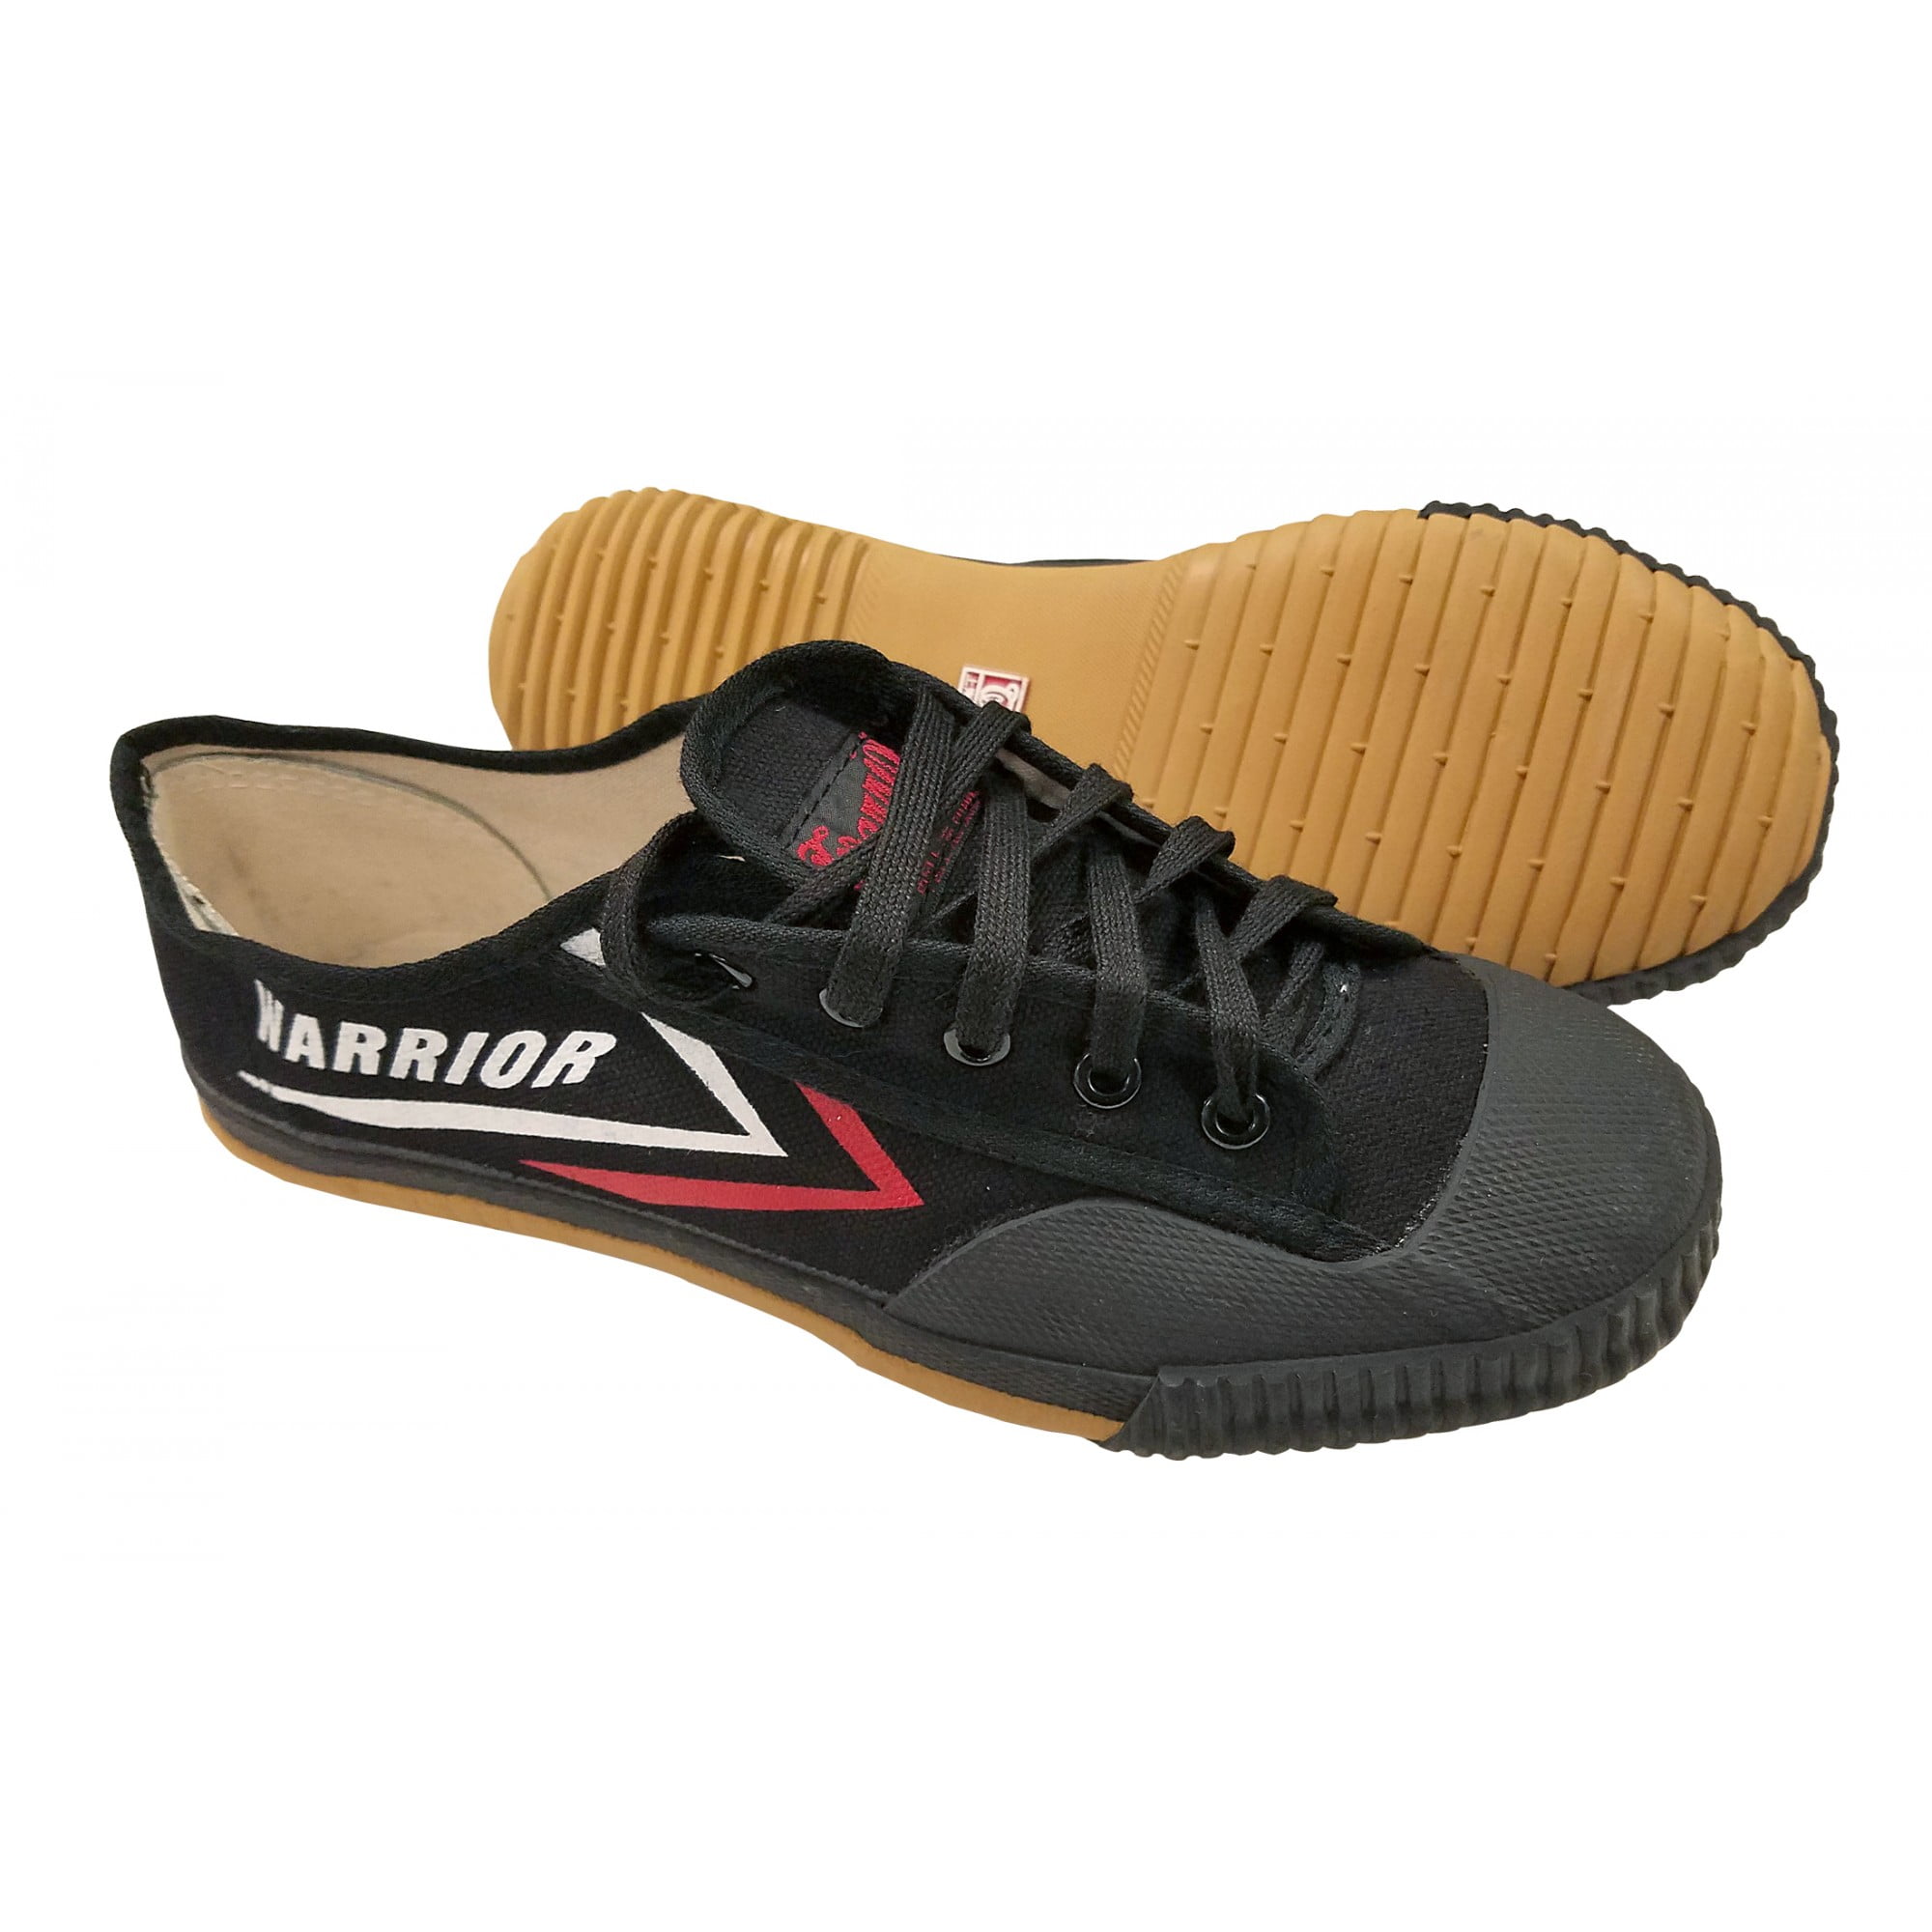 Sports Shoes Martial arts Non-slip Outdoor Rubber sole Durable High Quality